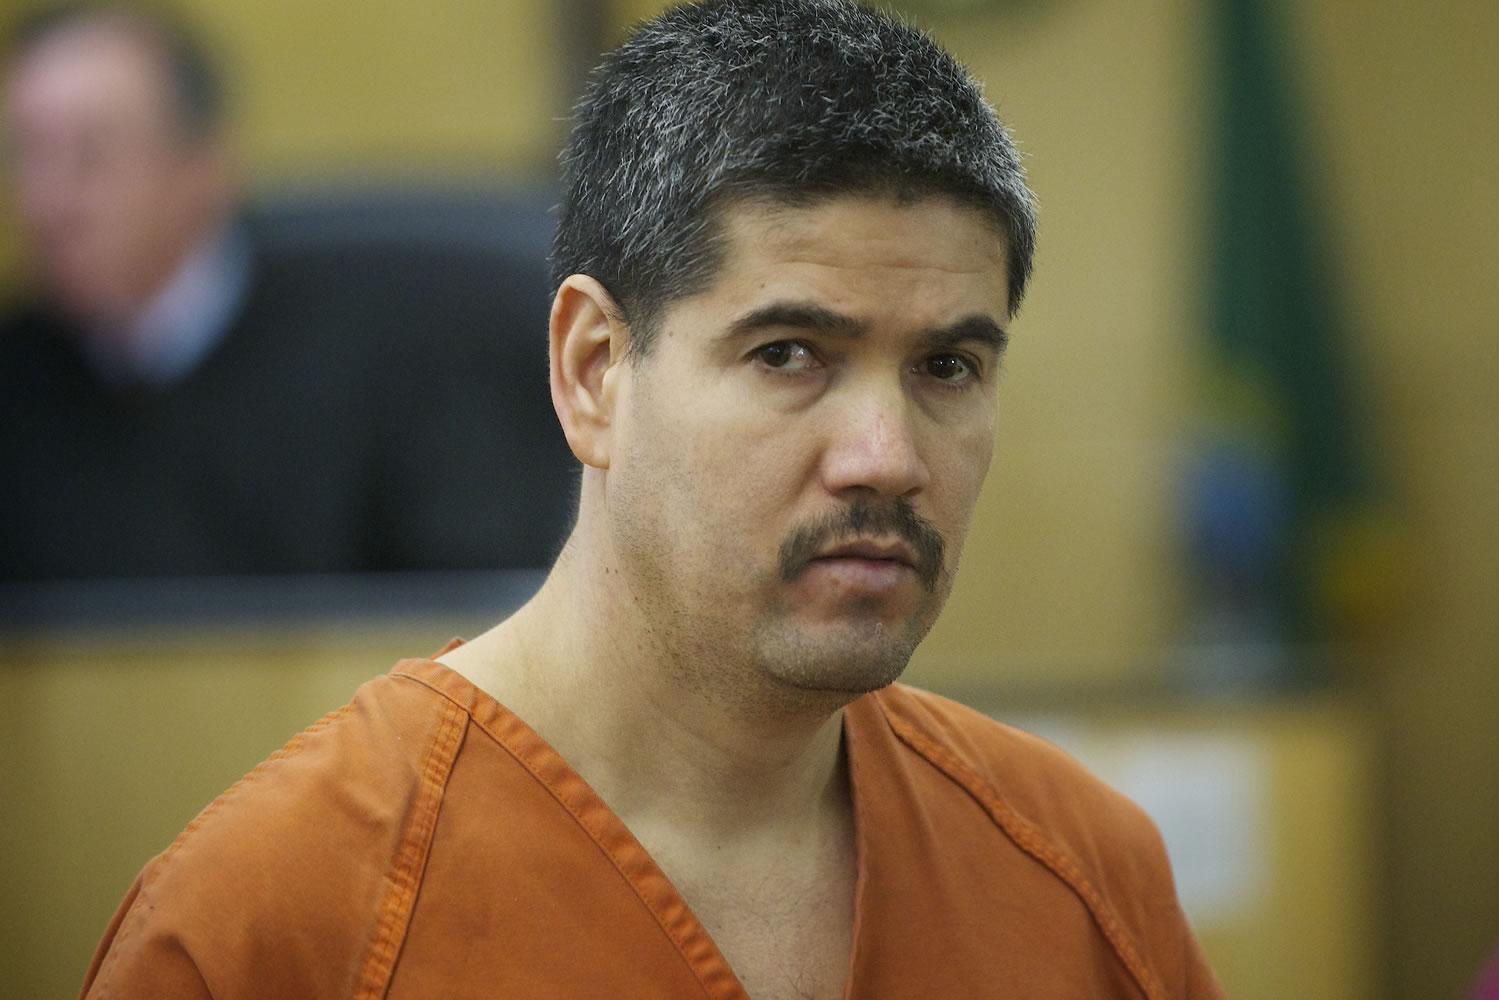 Gabriel Lomeli Orozco, 42, of Vancouver was sentenced to 110 months in prison today for strangling his wife, Maria, causing injuries that put her in a persistent vegetative state.